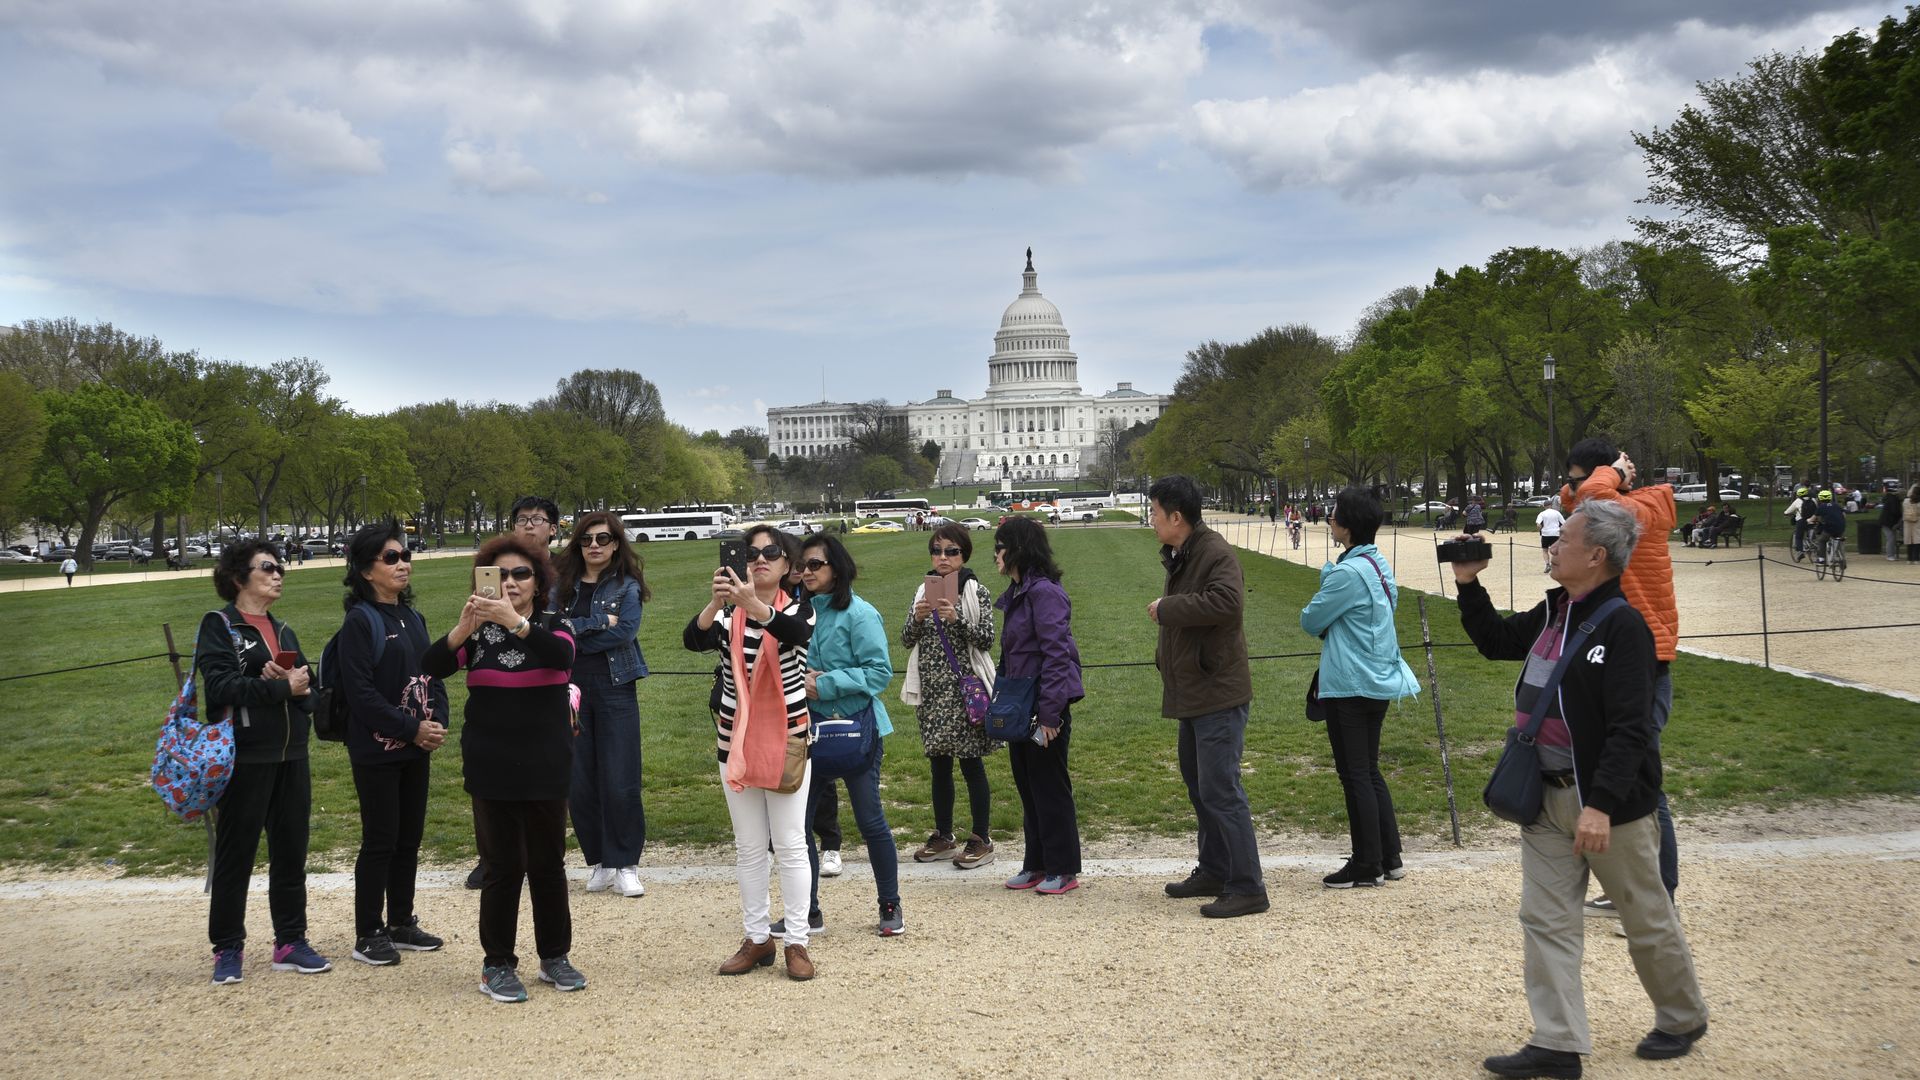 Chinese tourists taking pictures on the National Mall